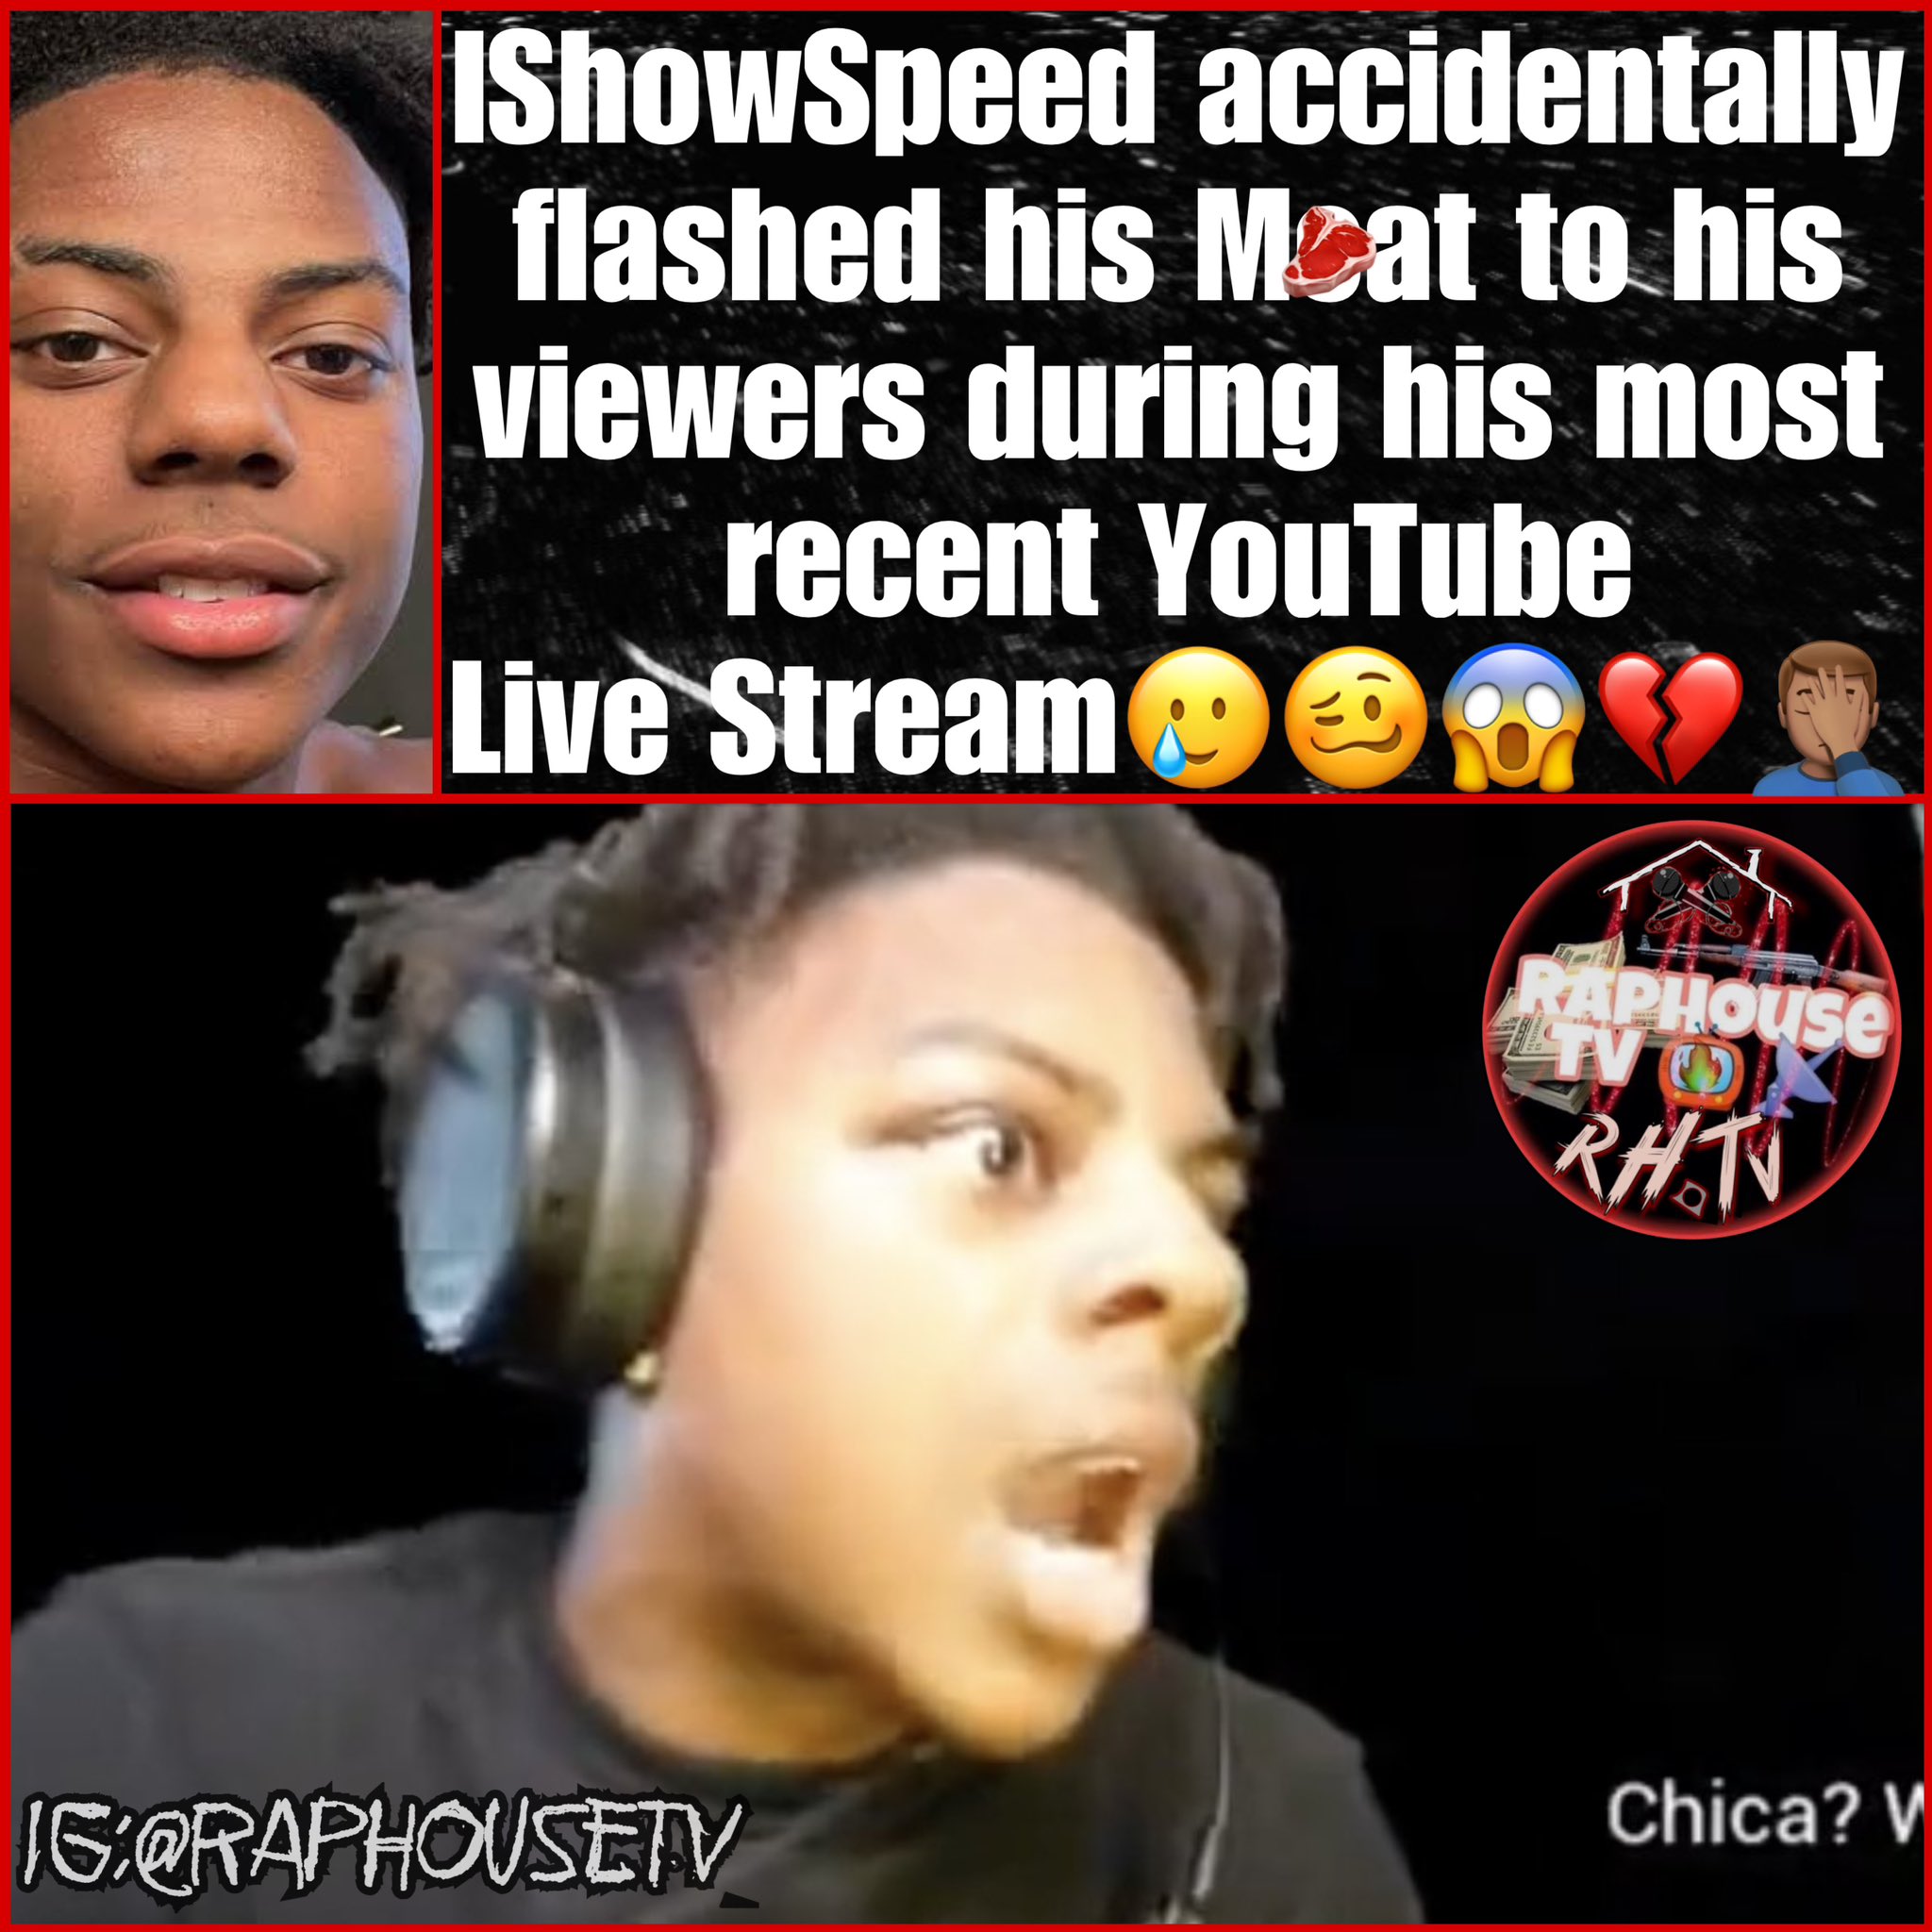 ISHOWSPEED FLASHED HIS MEAT LIVE ?????